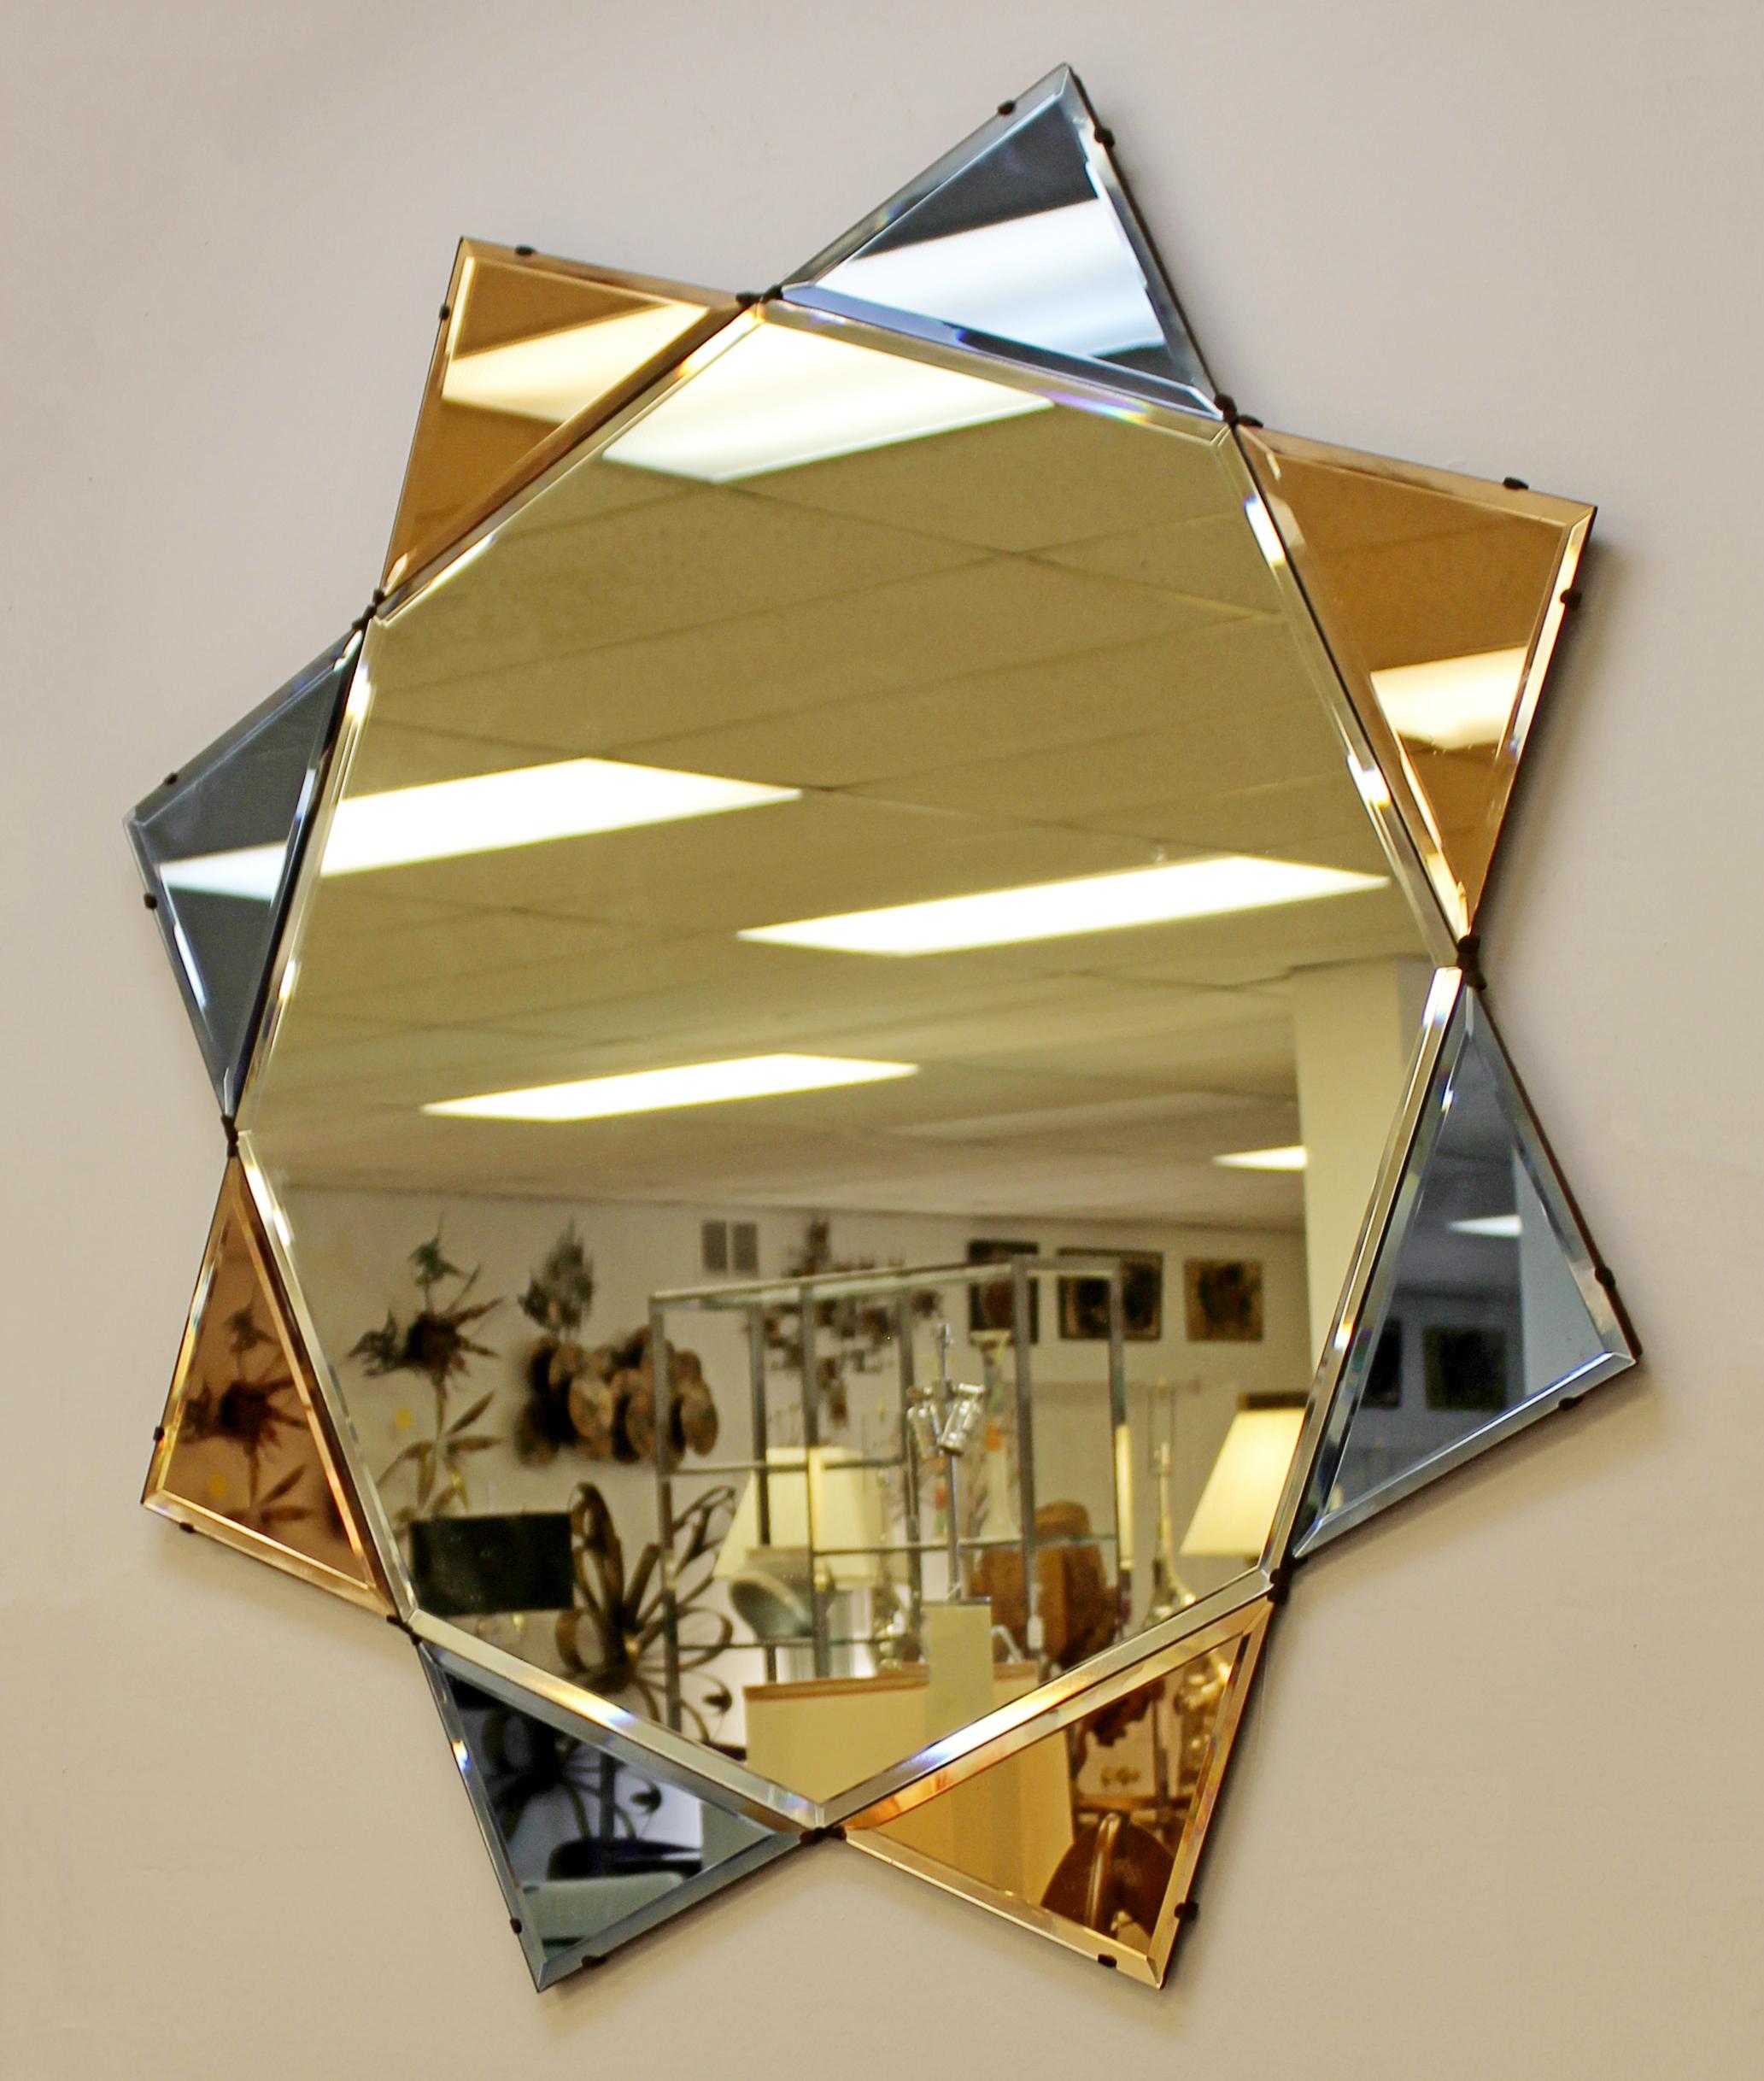 For your consideration is a captivating, large, diamond or star shaped wall mirror, with blue and pink tinted sections, despite the pink sections appearing orange in the photos; circa 1930s-1940s. In excellent antique condition. The dimensions are